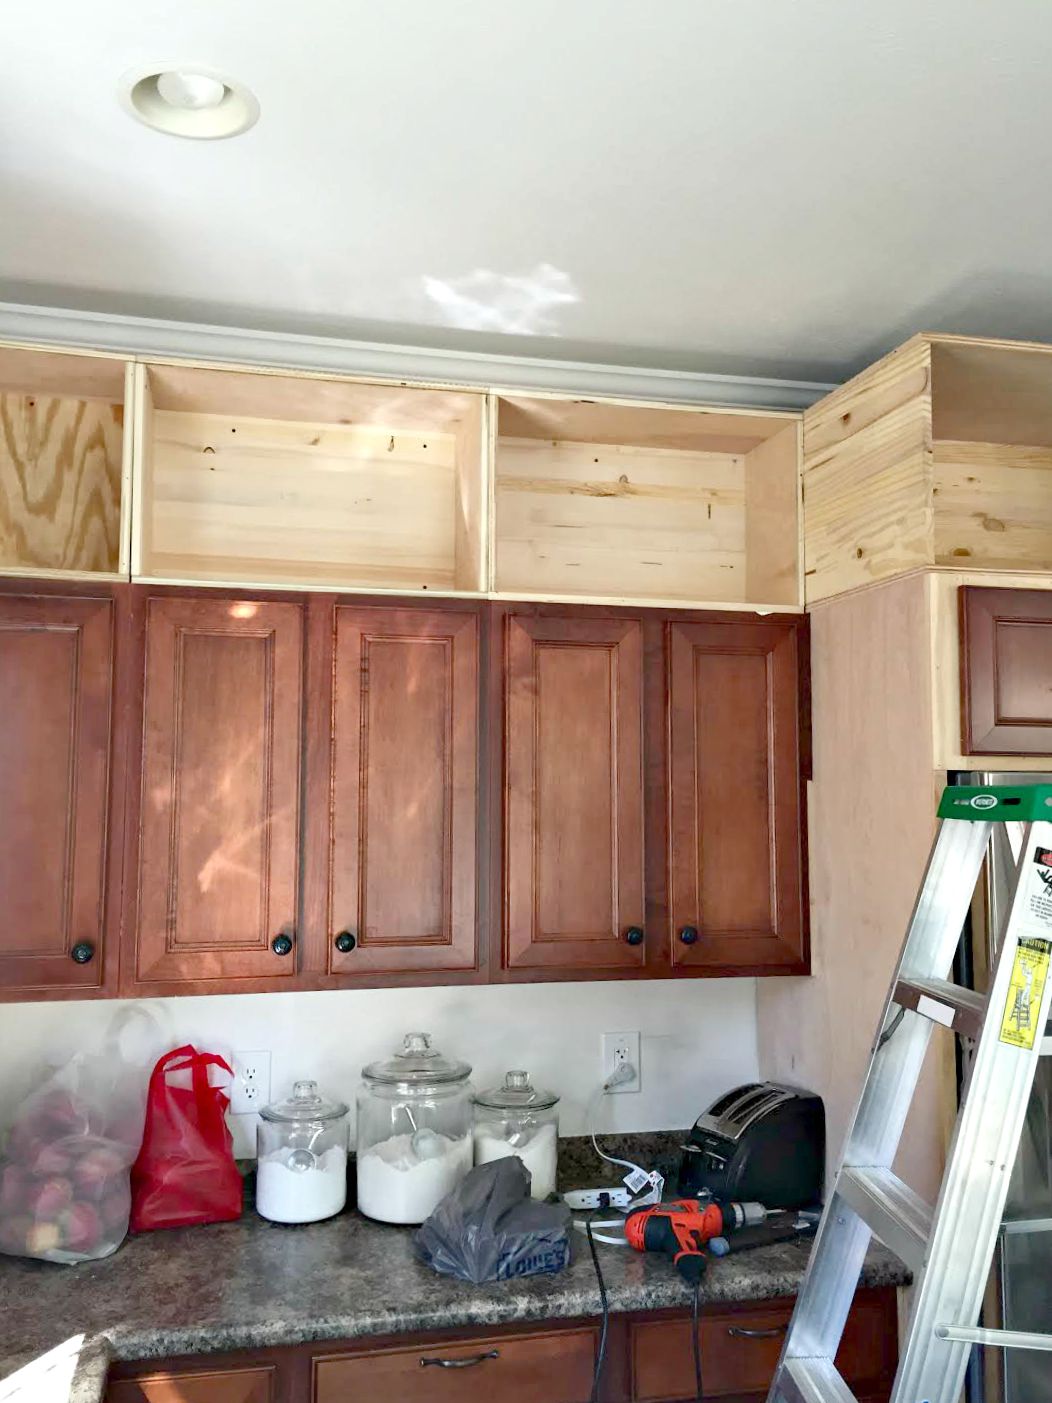 DIY extending cabinets to ceiling